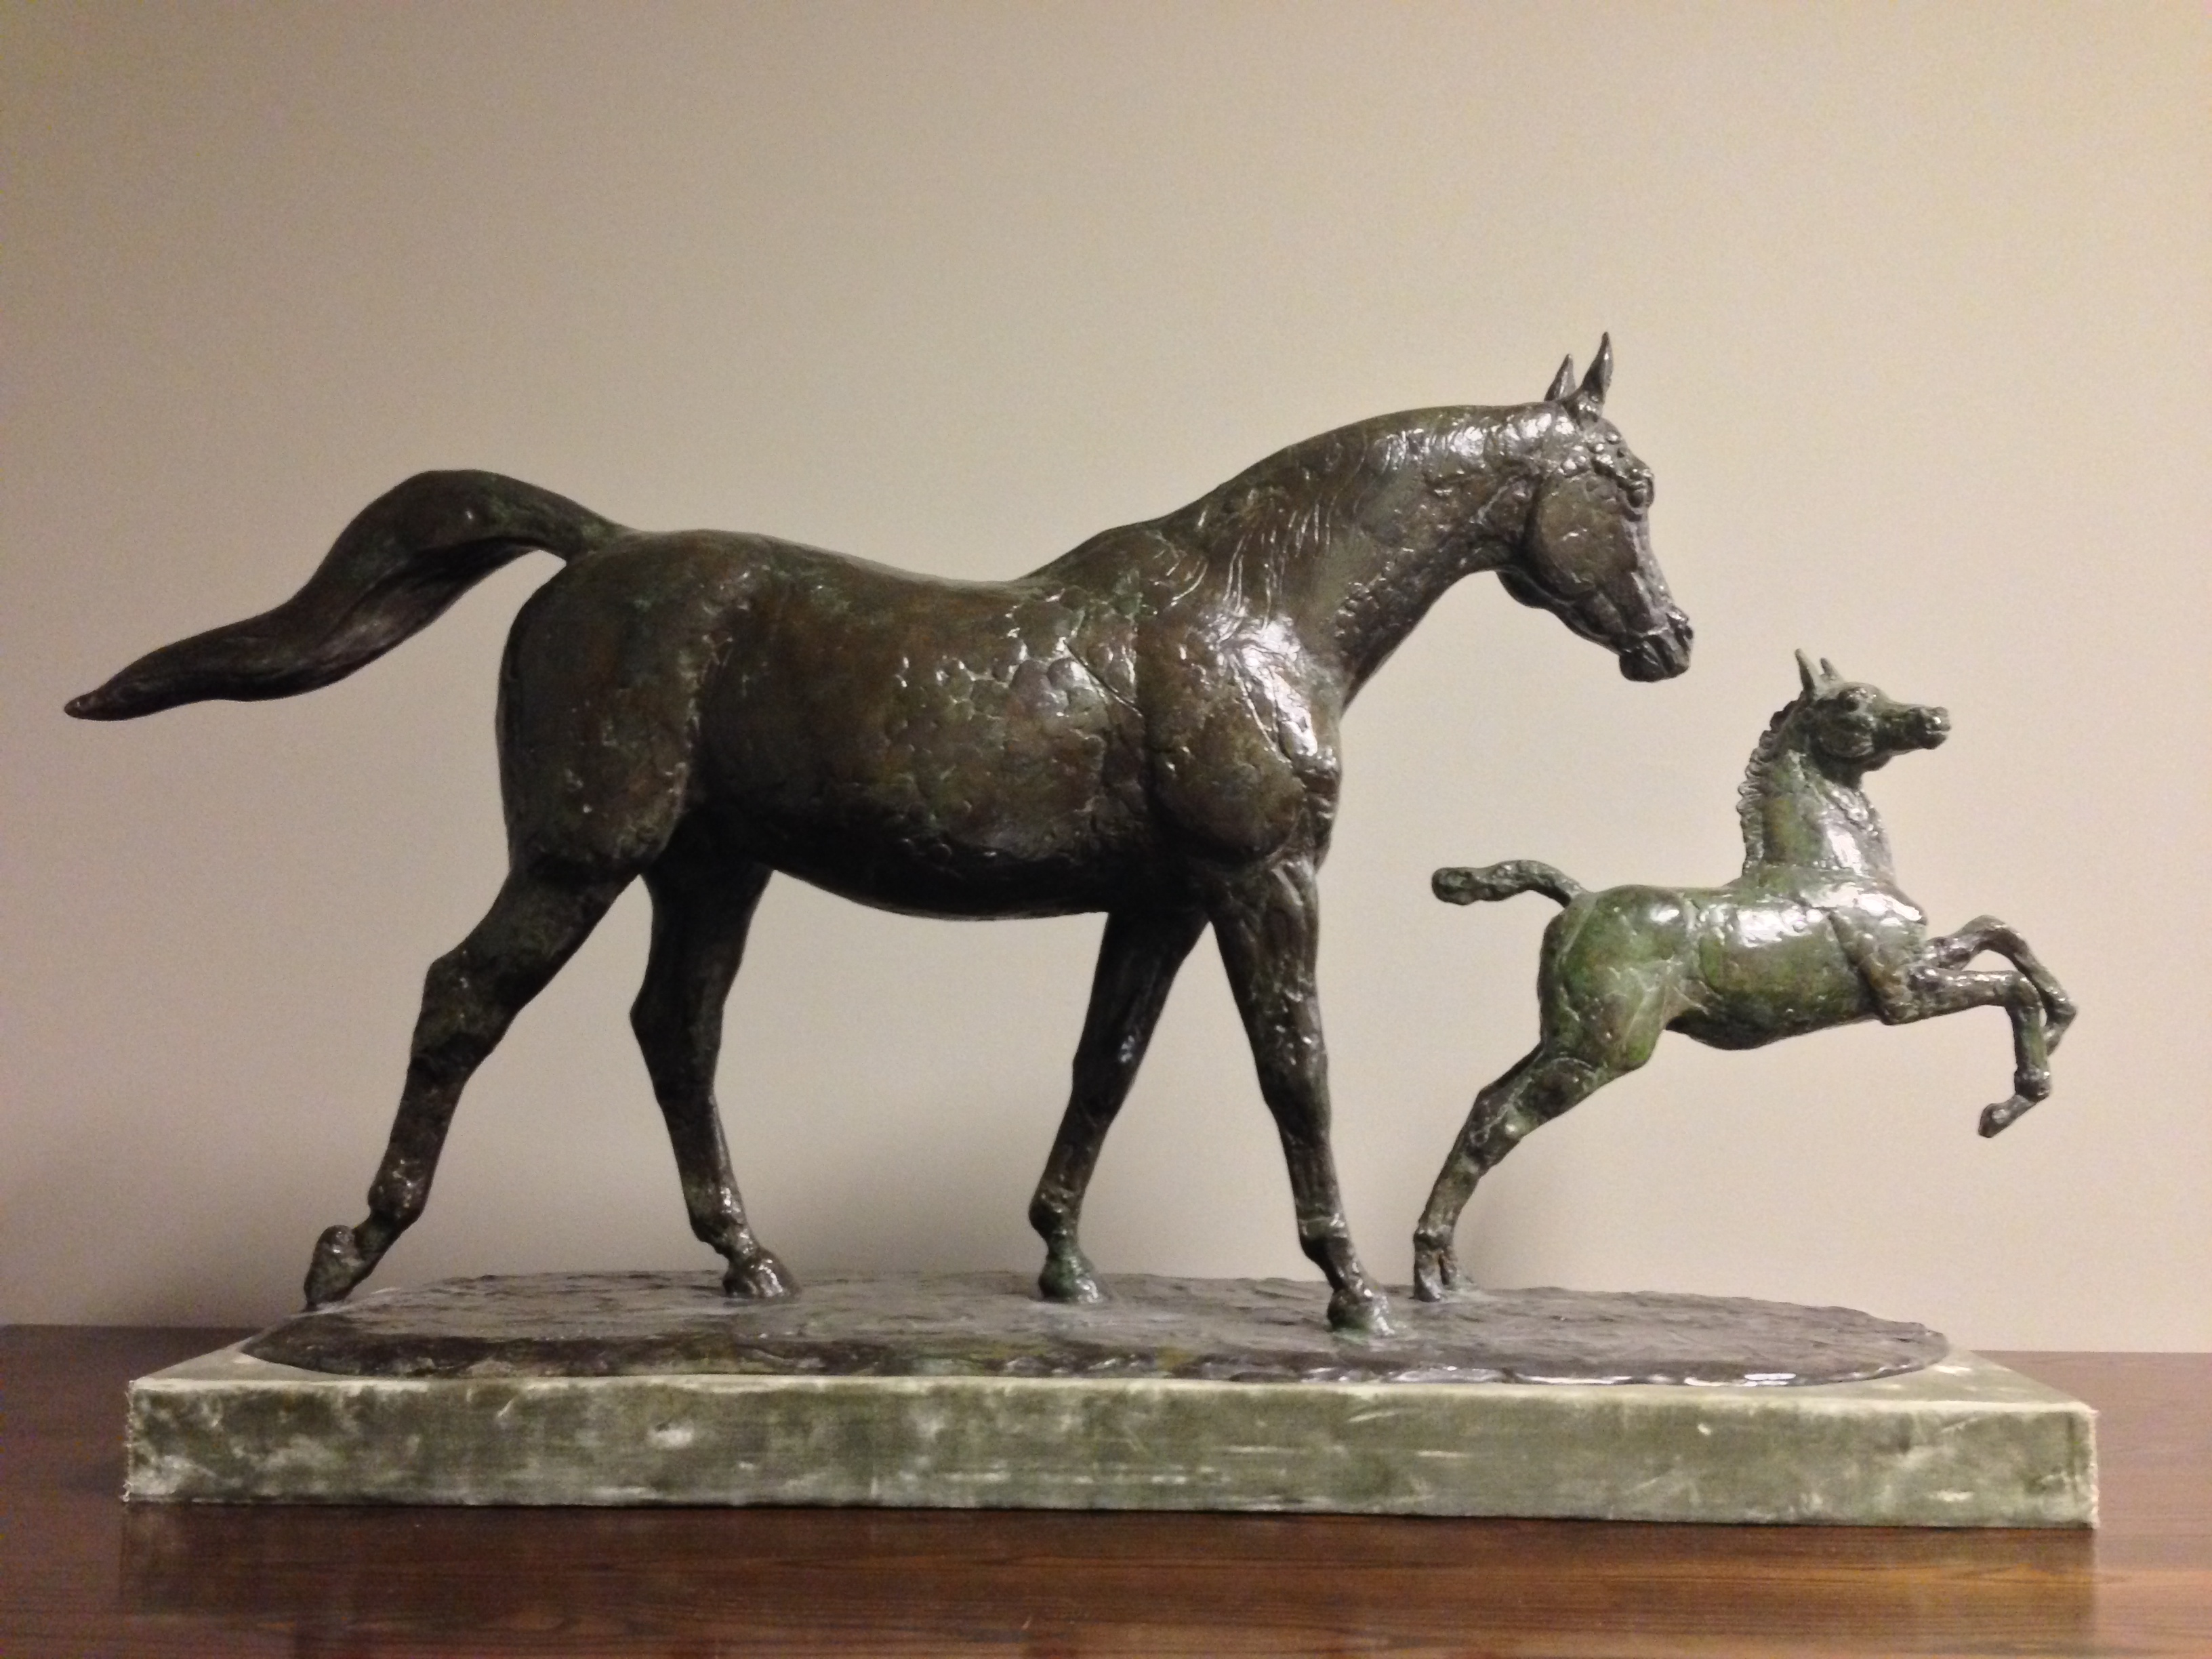 1993.4: Mare and Foal by Herbert Haseltine (1877-1962), Bronze, 1948, Gift: Paul Mellon